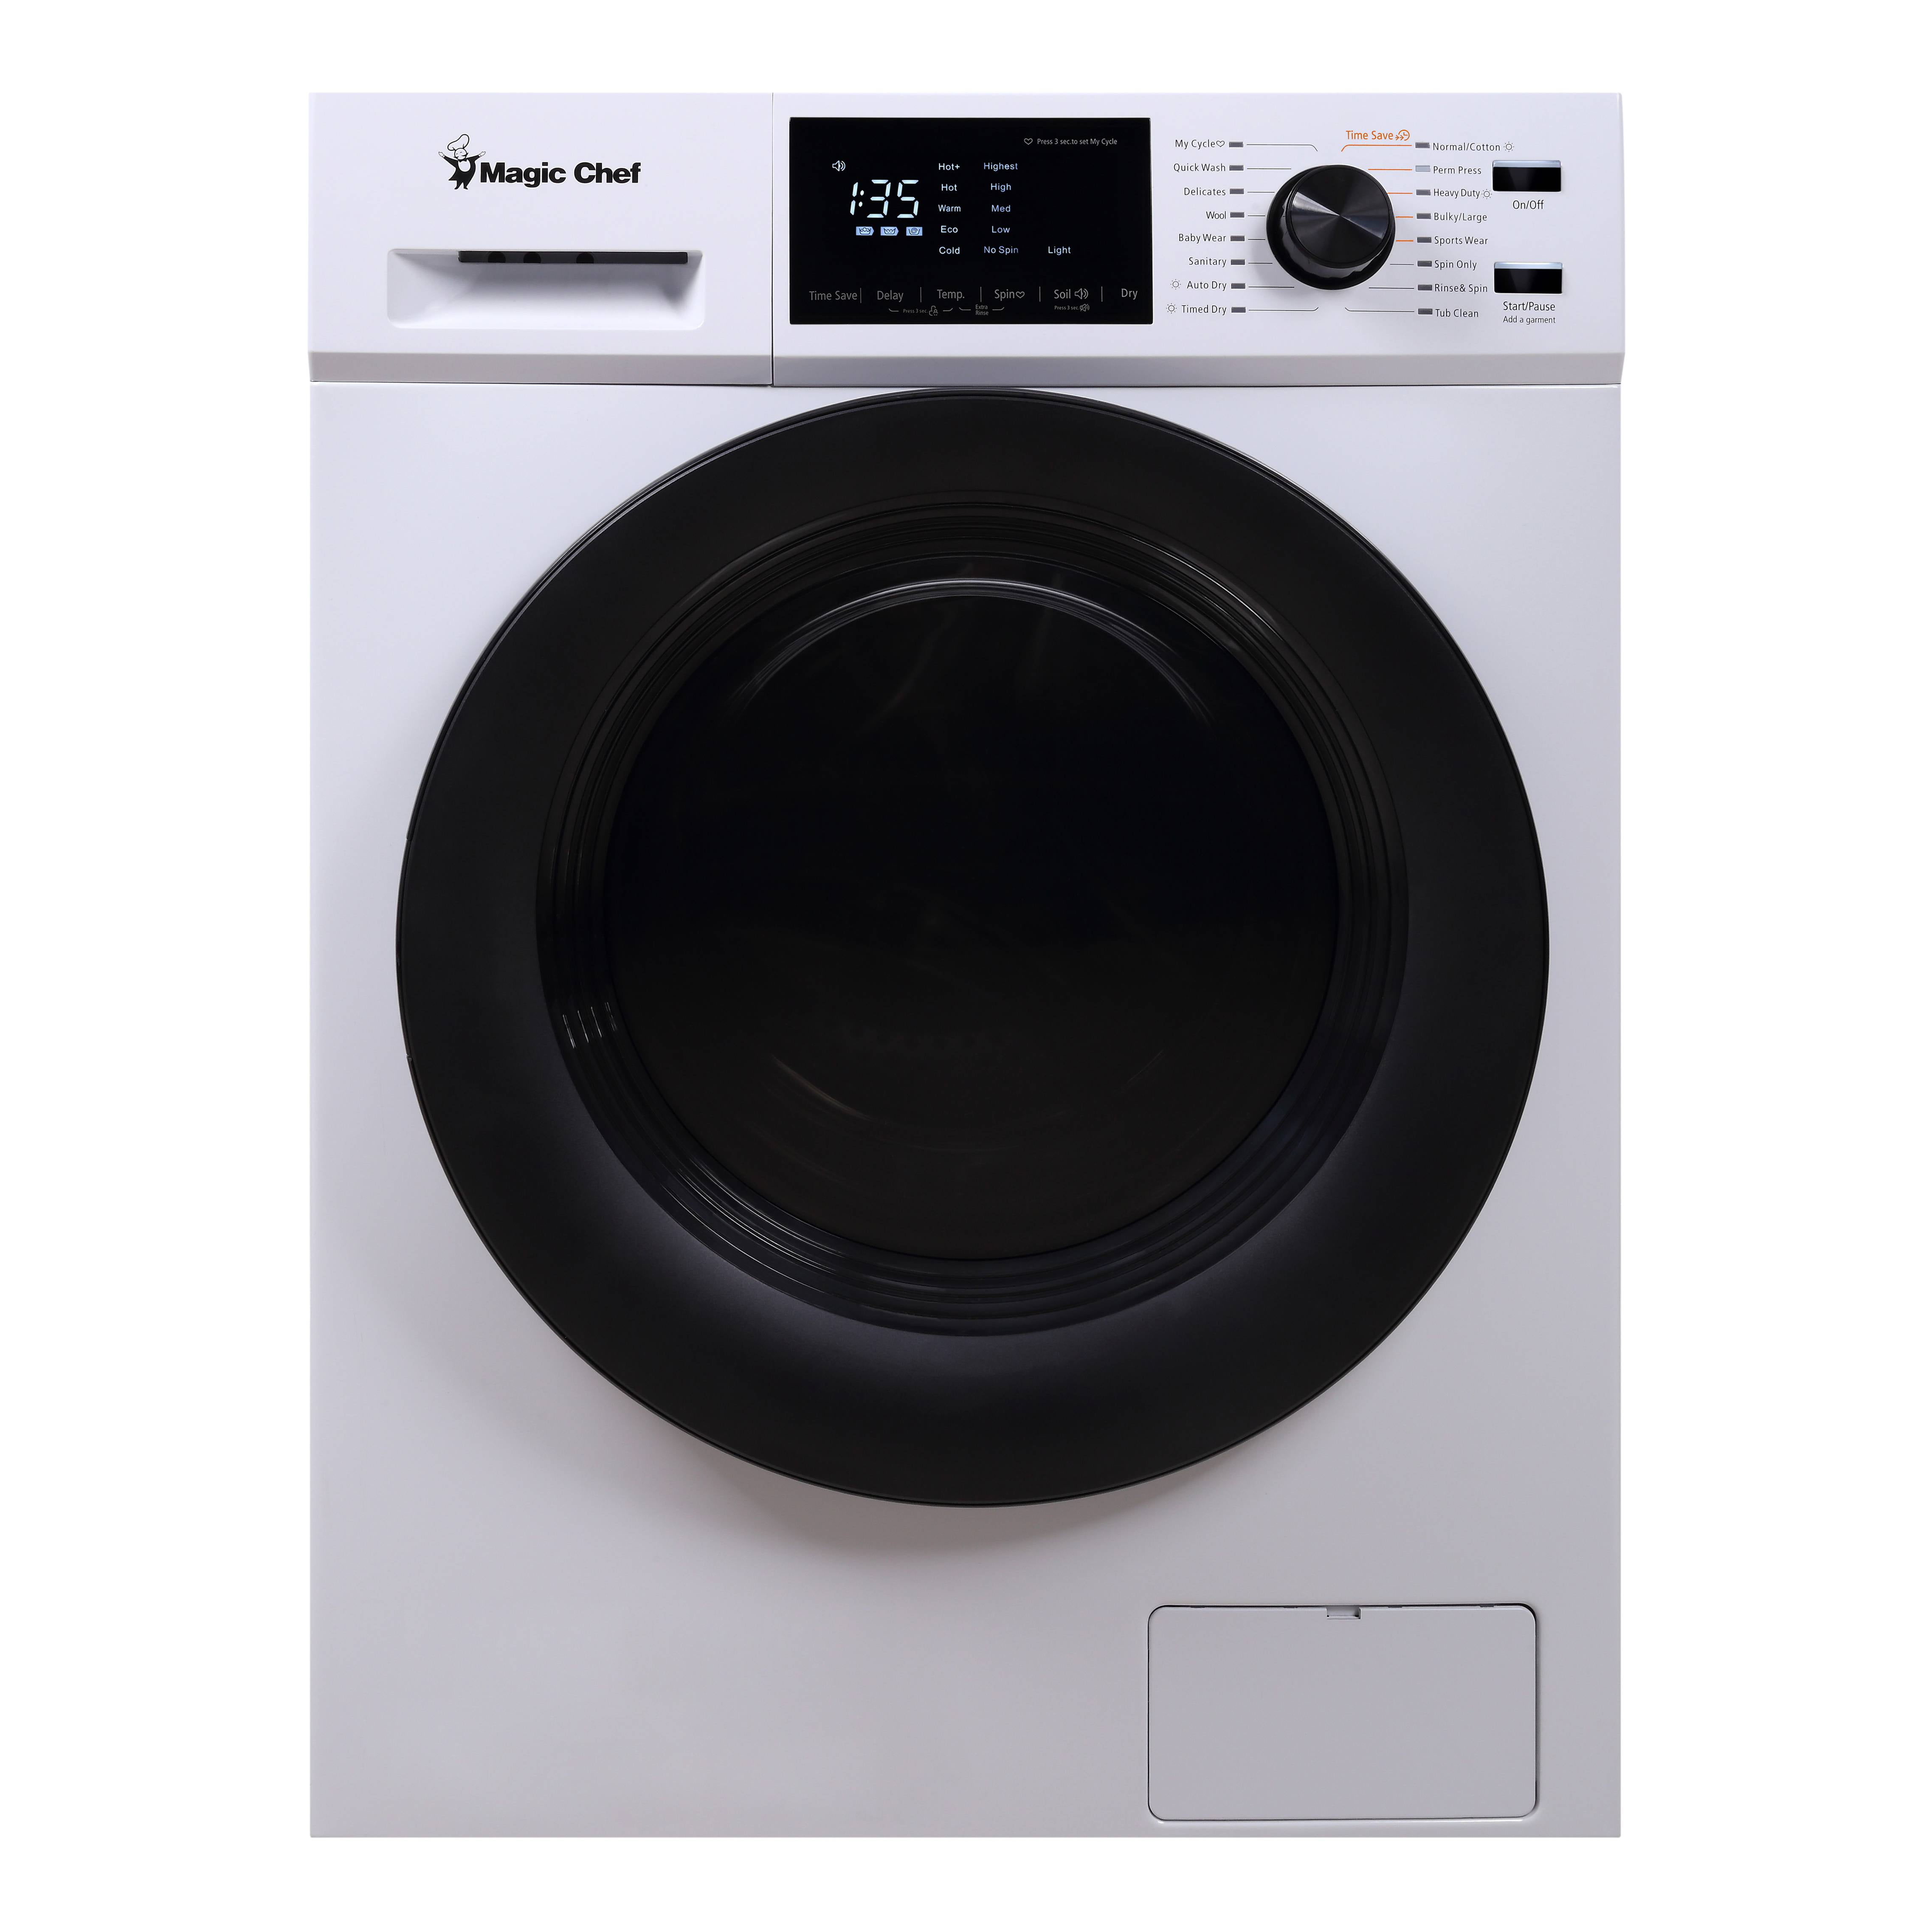 BLACK+DECKER 2.7 Cubic Feet cu. ft. Portable Washer & Dryer Combo in White  with Child Safety Lock